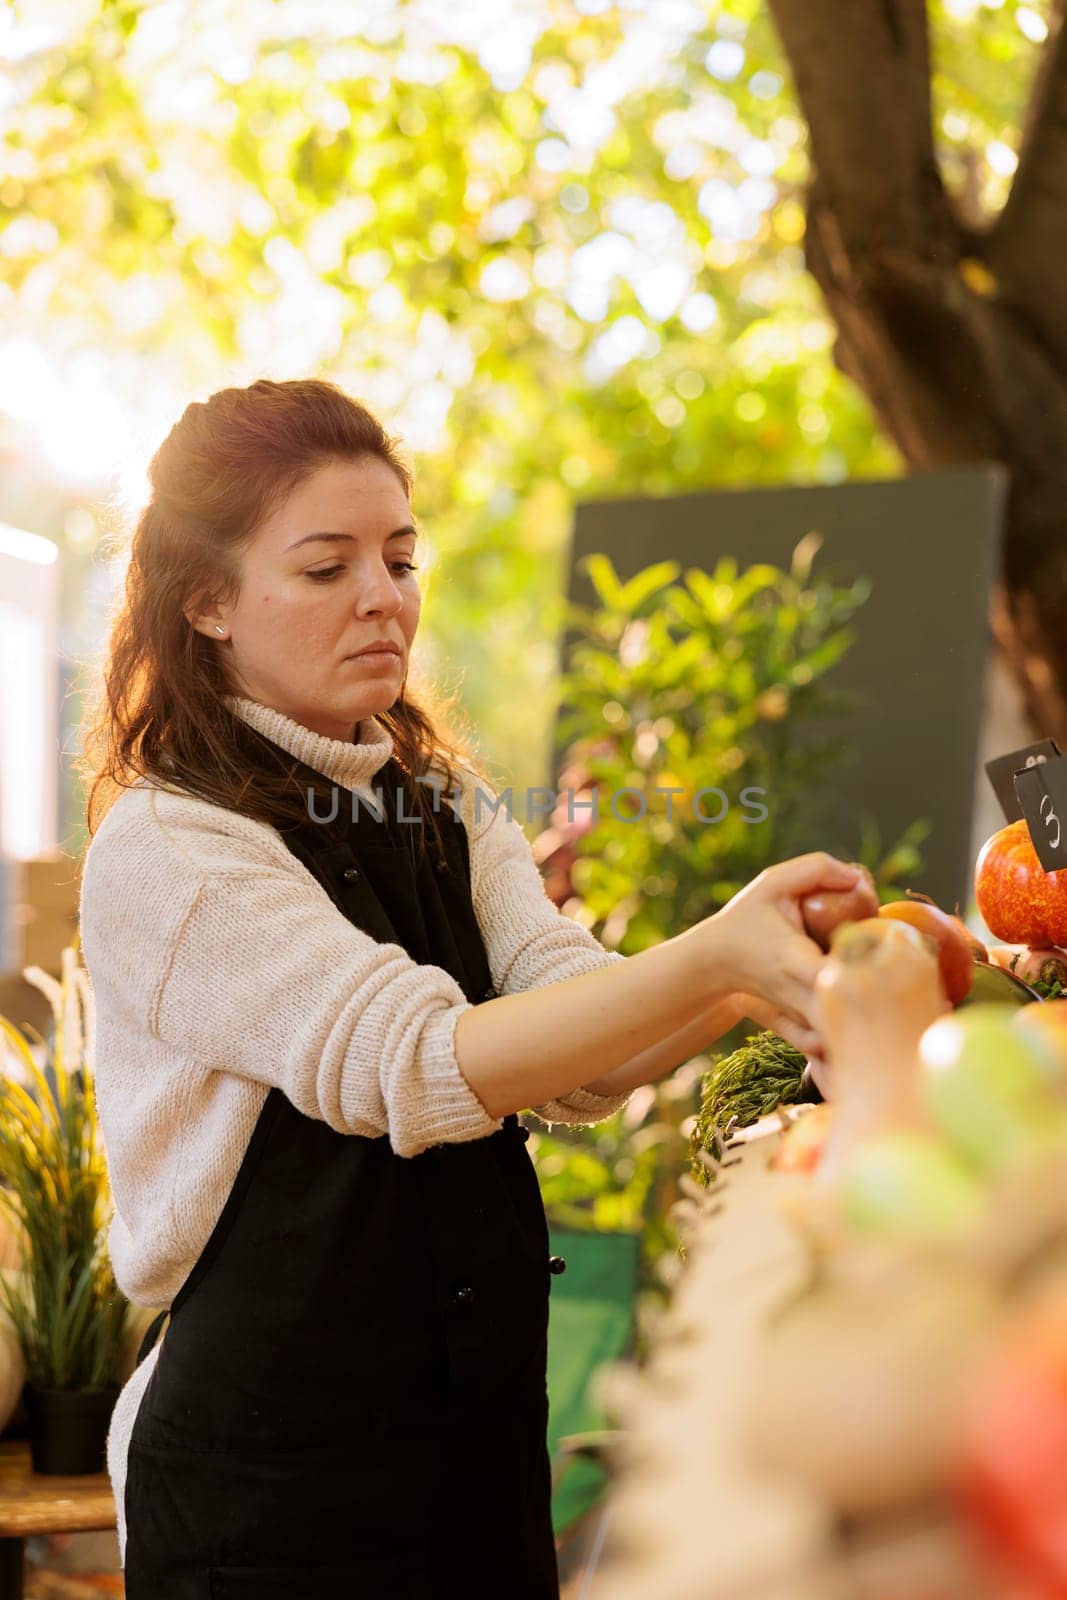 Female small business owner arranging locally grown organic produce on farmers market booth. Young woman vendor putting fresh fruits and veggies on greenmarket stand, ready to sell to customers.